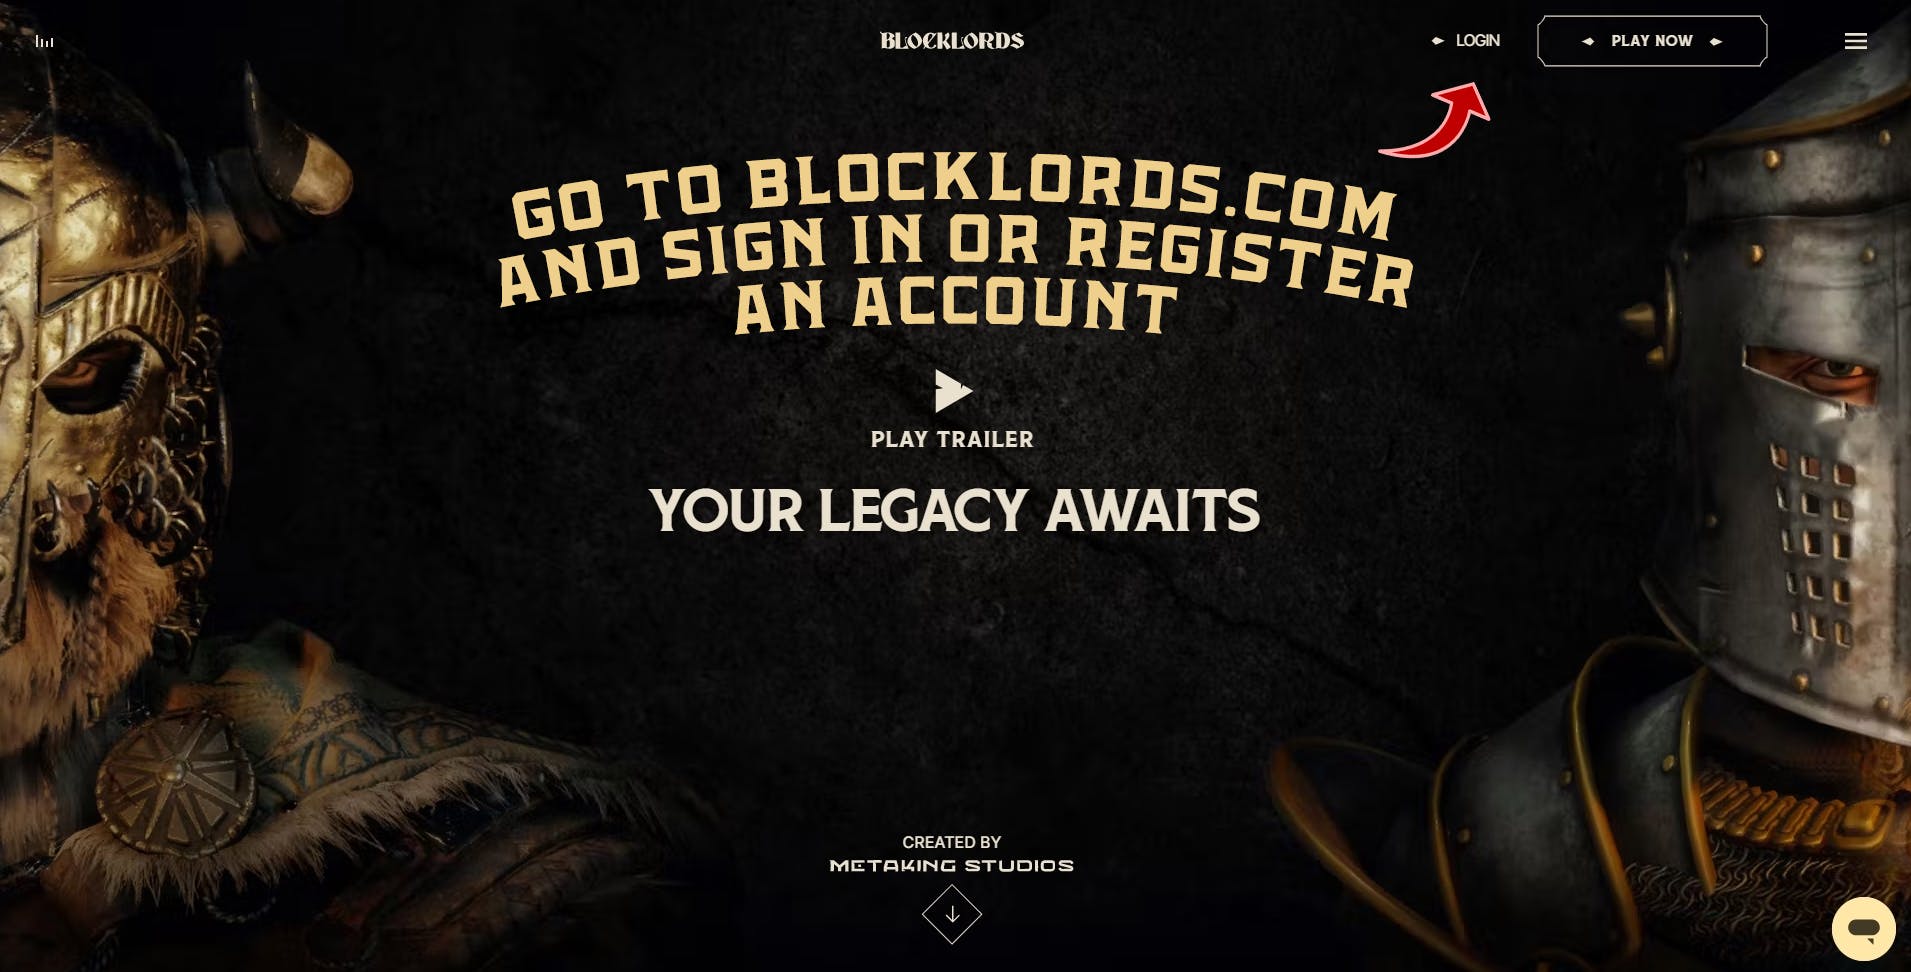 BLOCKLORDS  Download and Play for Free - Epic Games Store